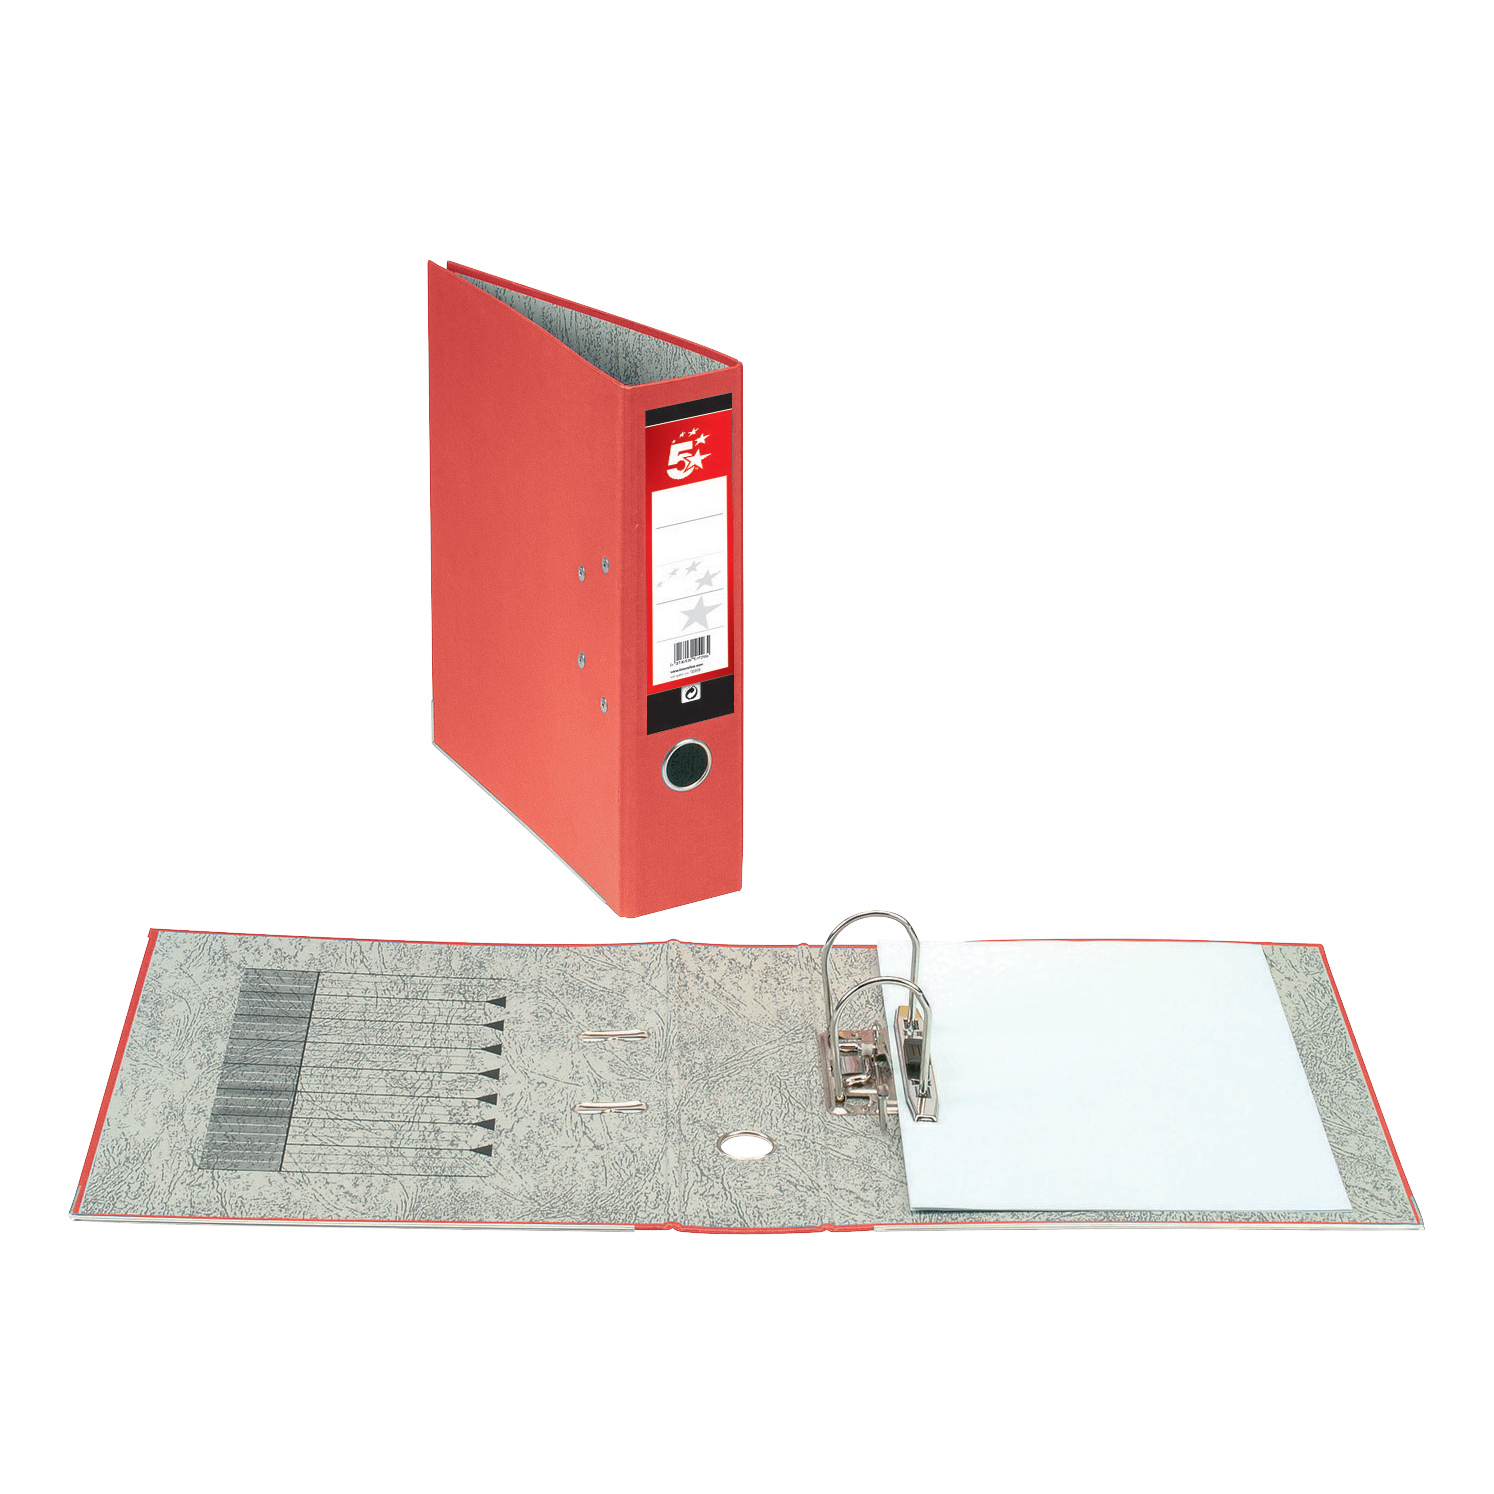 5 Star Office Lever Arch File 70mm Spine A4 Red